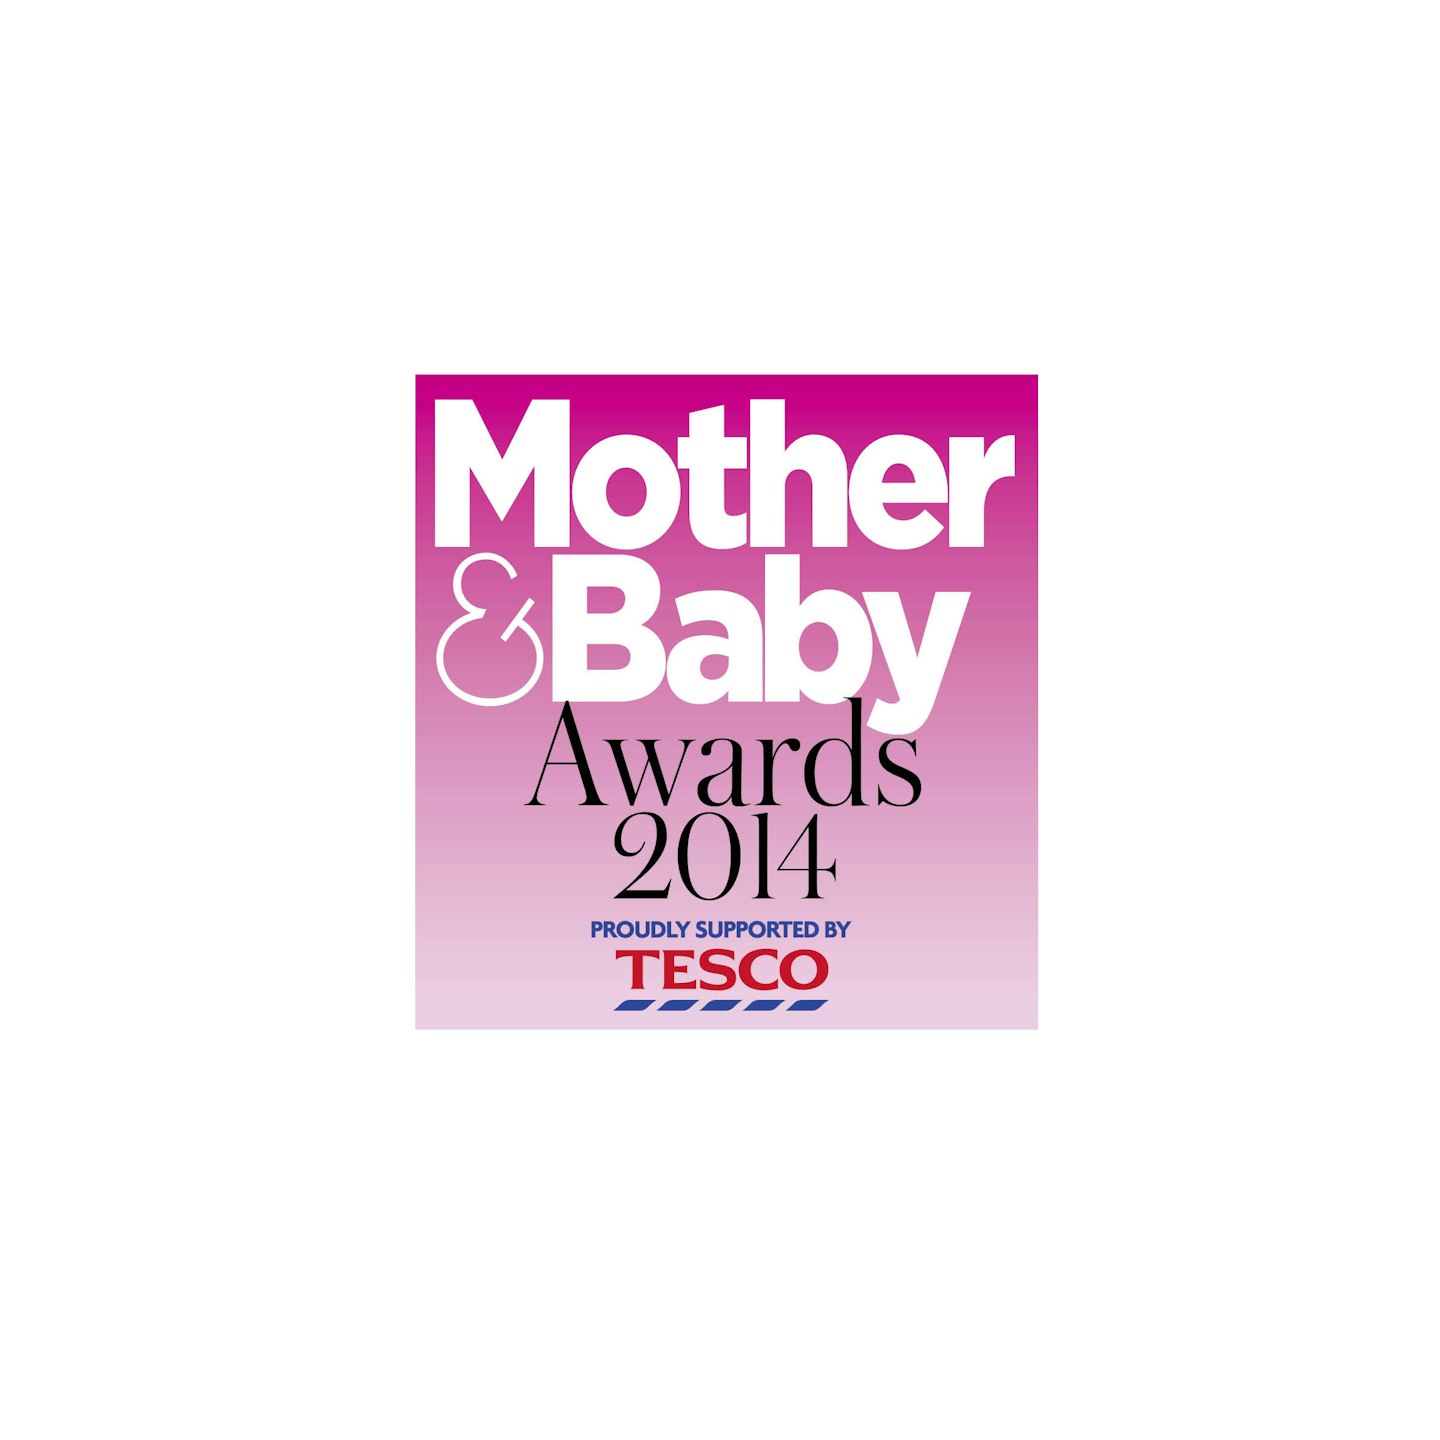 Do You Know Britain's Bravest Mum? Get Nominating!